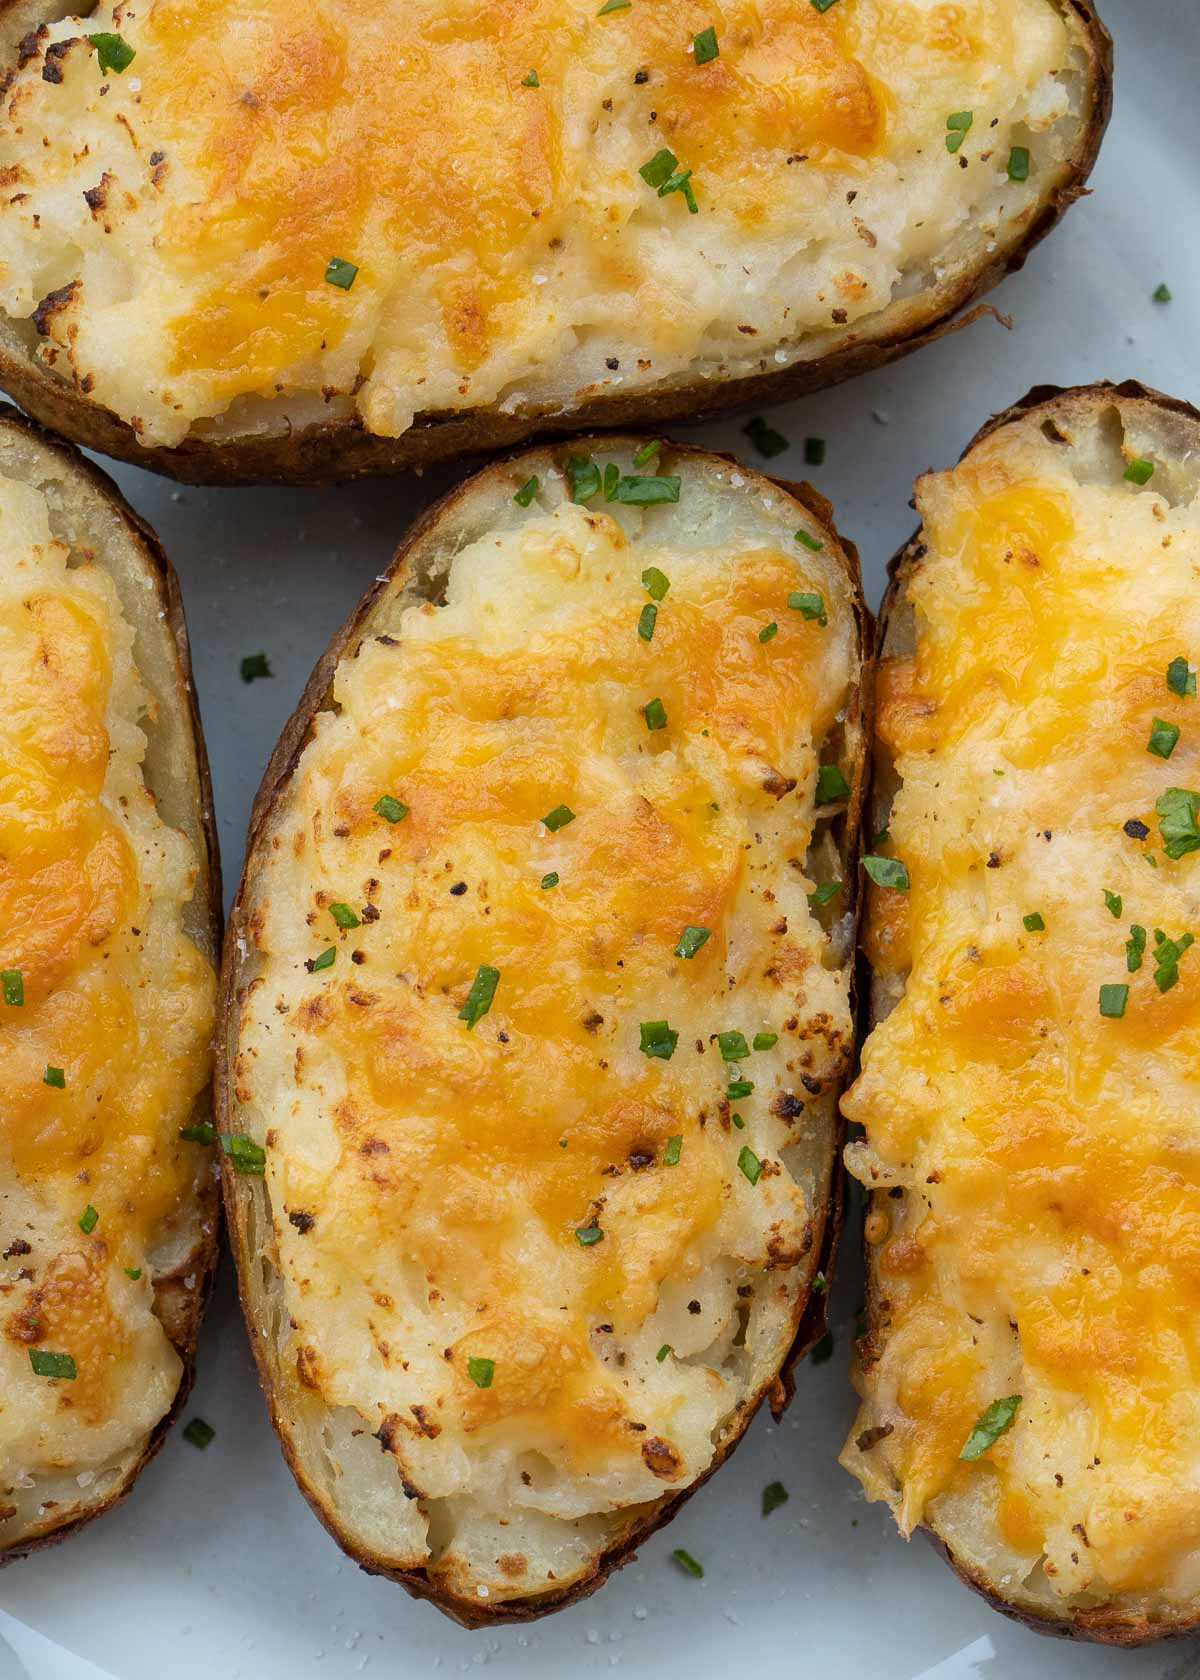 These Air Fryer Twice Baked Potatoes are the perfect side dish or appetizer! Get that cheesy center and ultra-crispy potato skin quickly with this easy recipe.